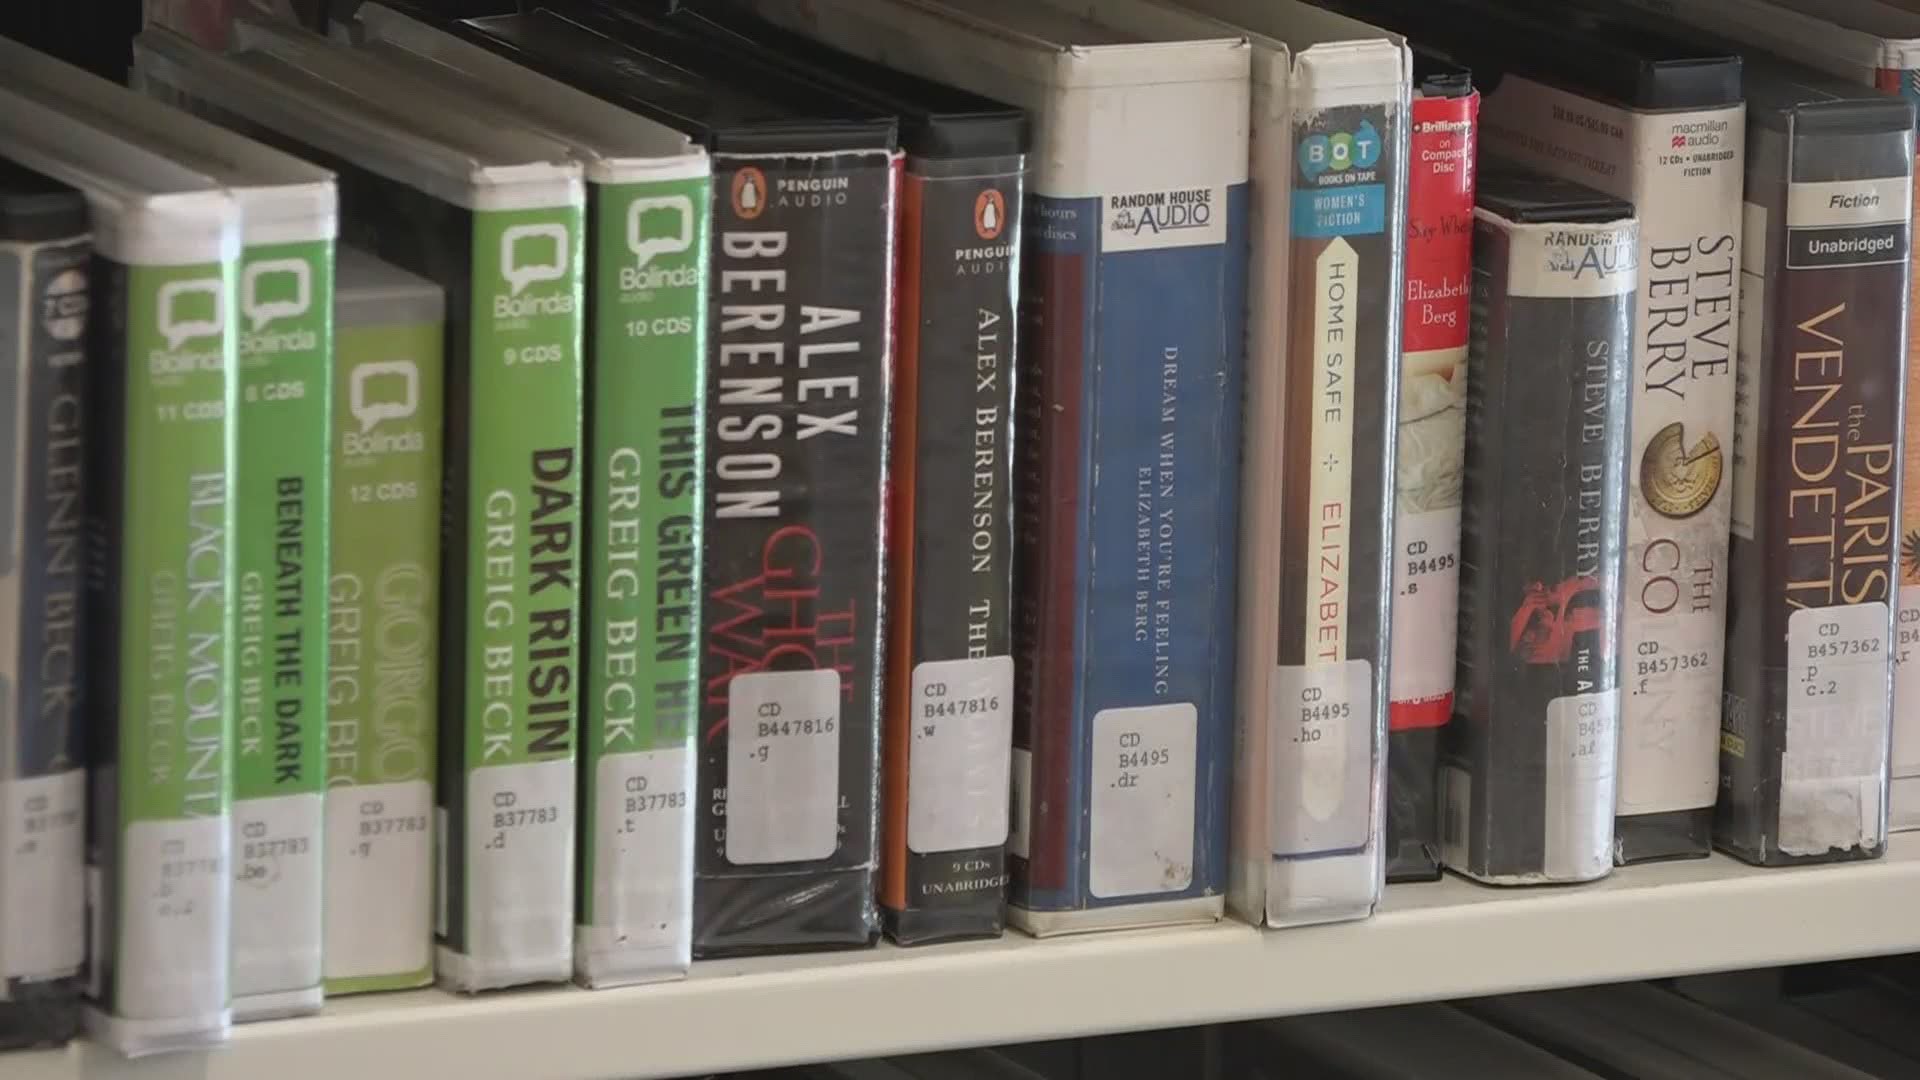 Libraries across Maine are opening up but checking out a book is going to be different.